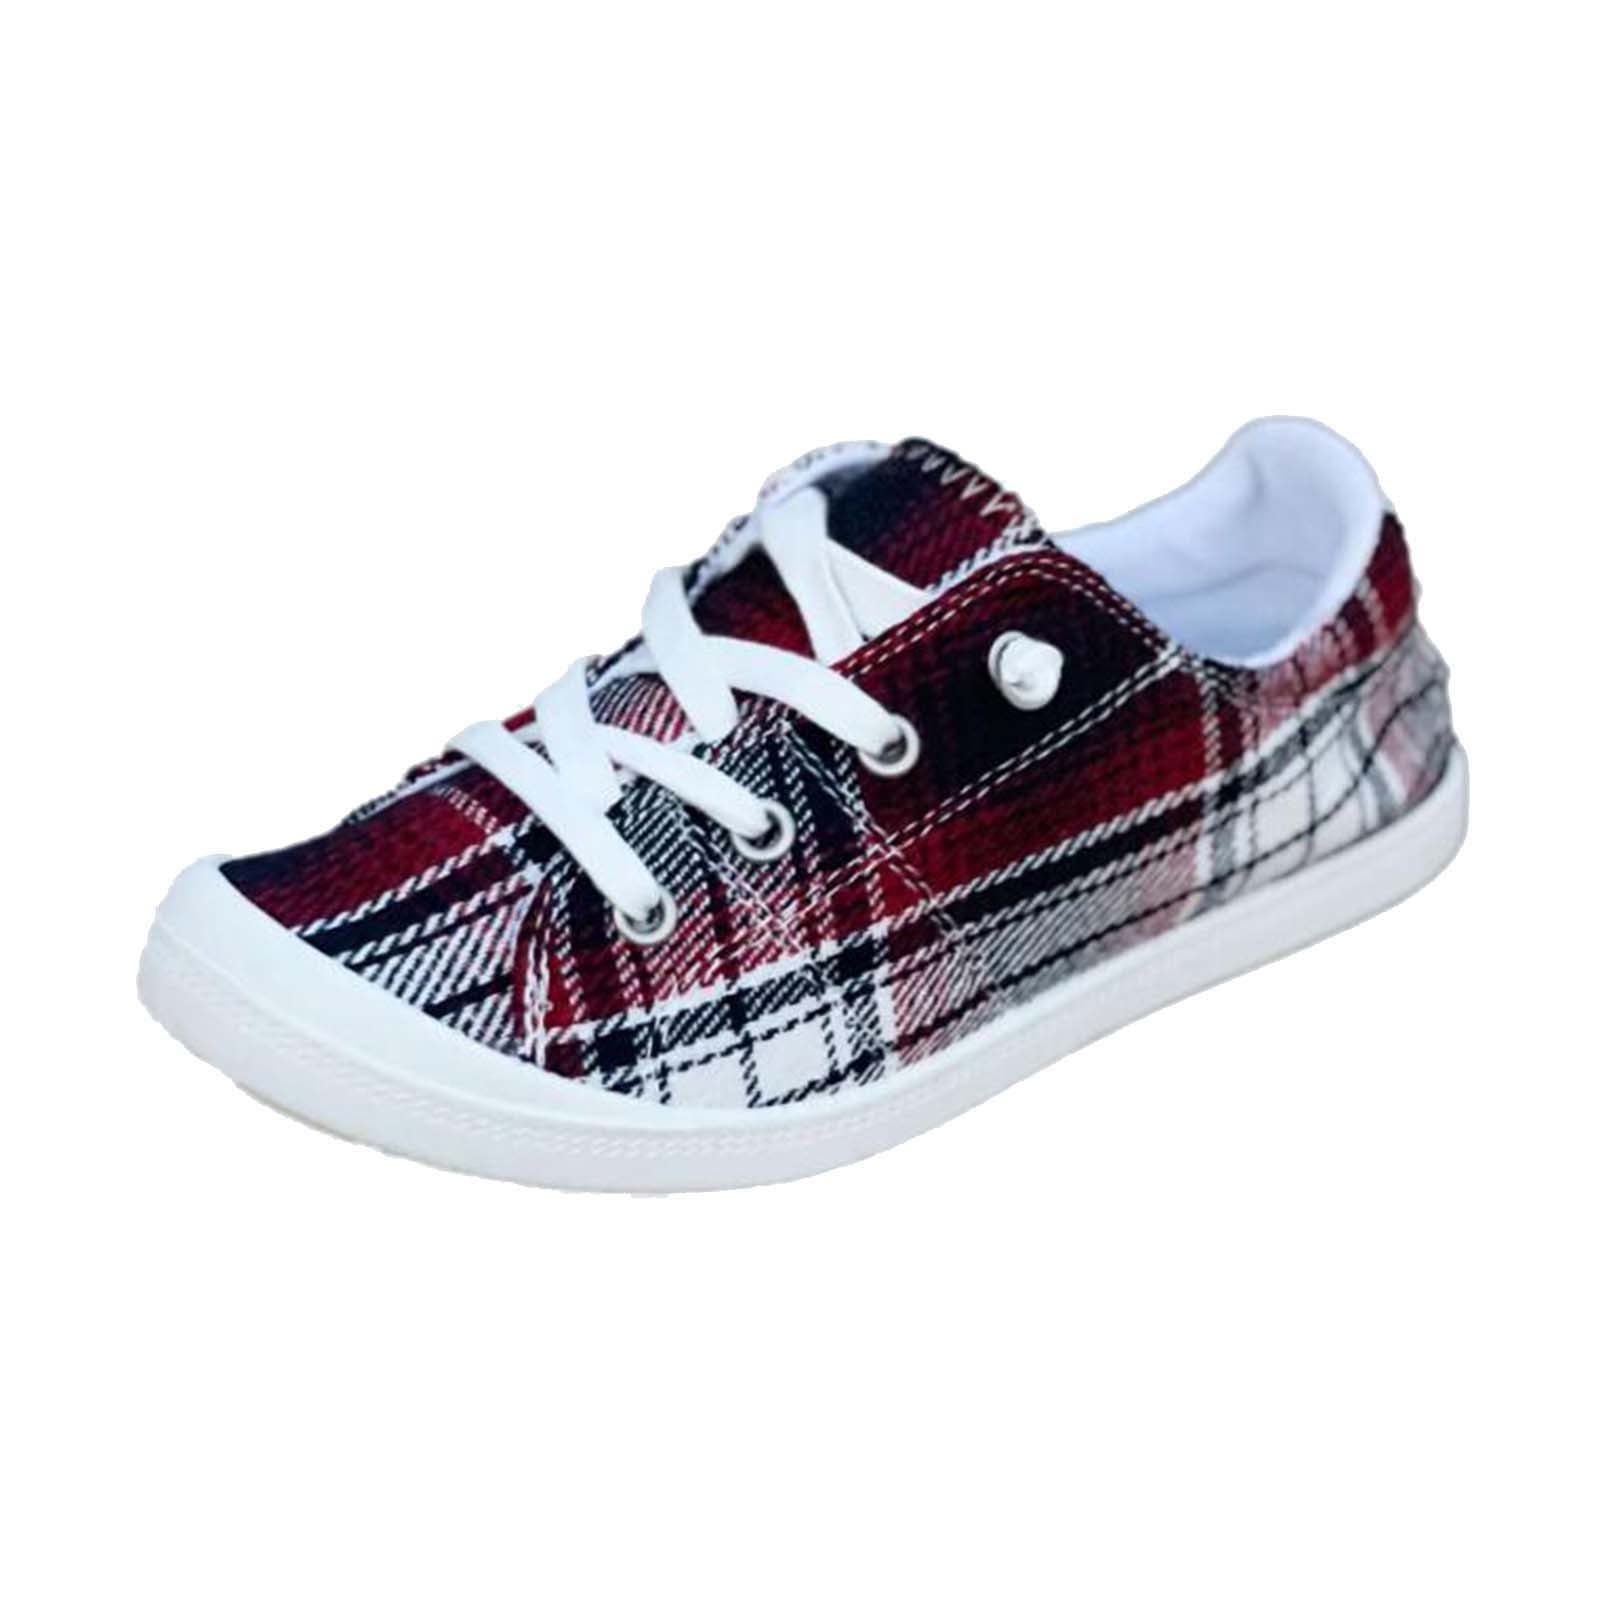 Women's Casual Shoes Flat Fashion Trainer Lace-up Sneakers #1802